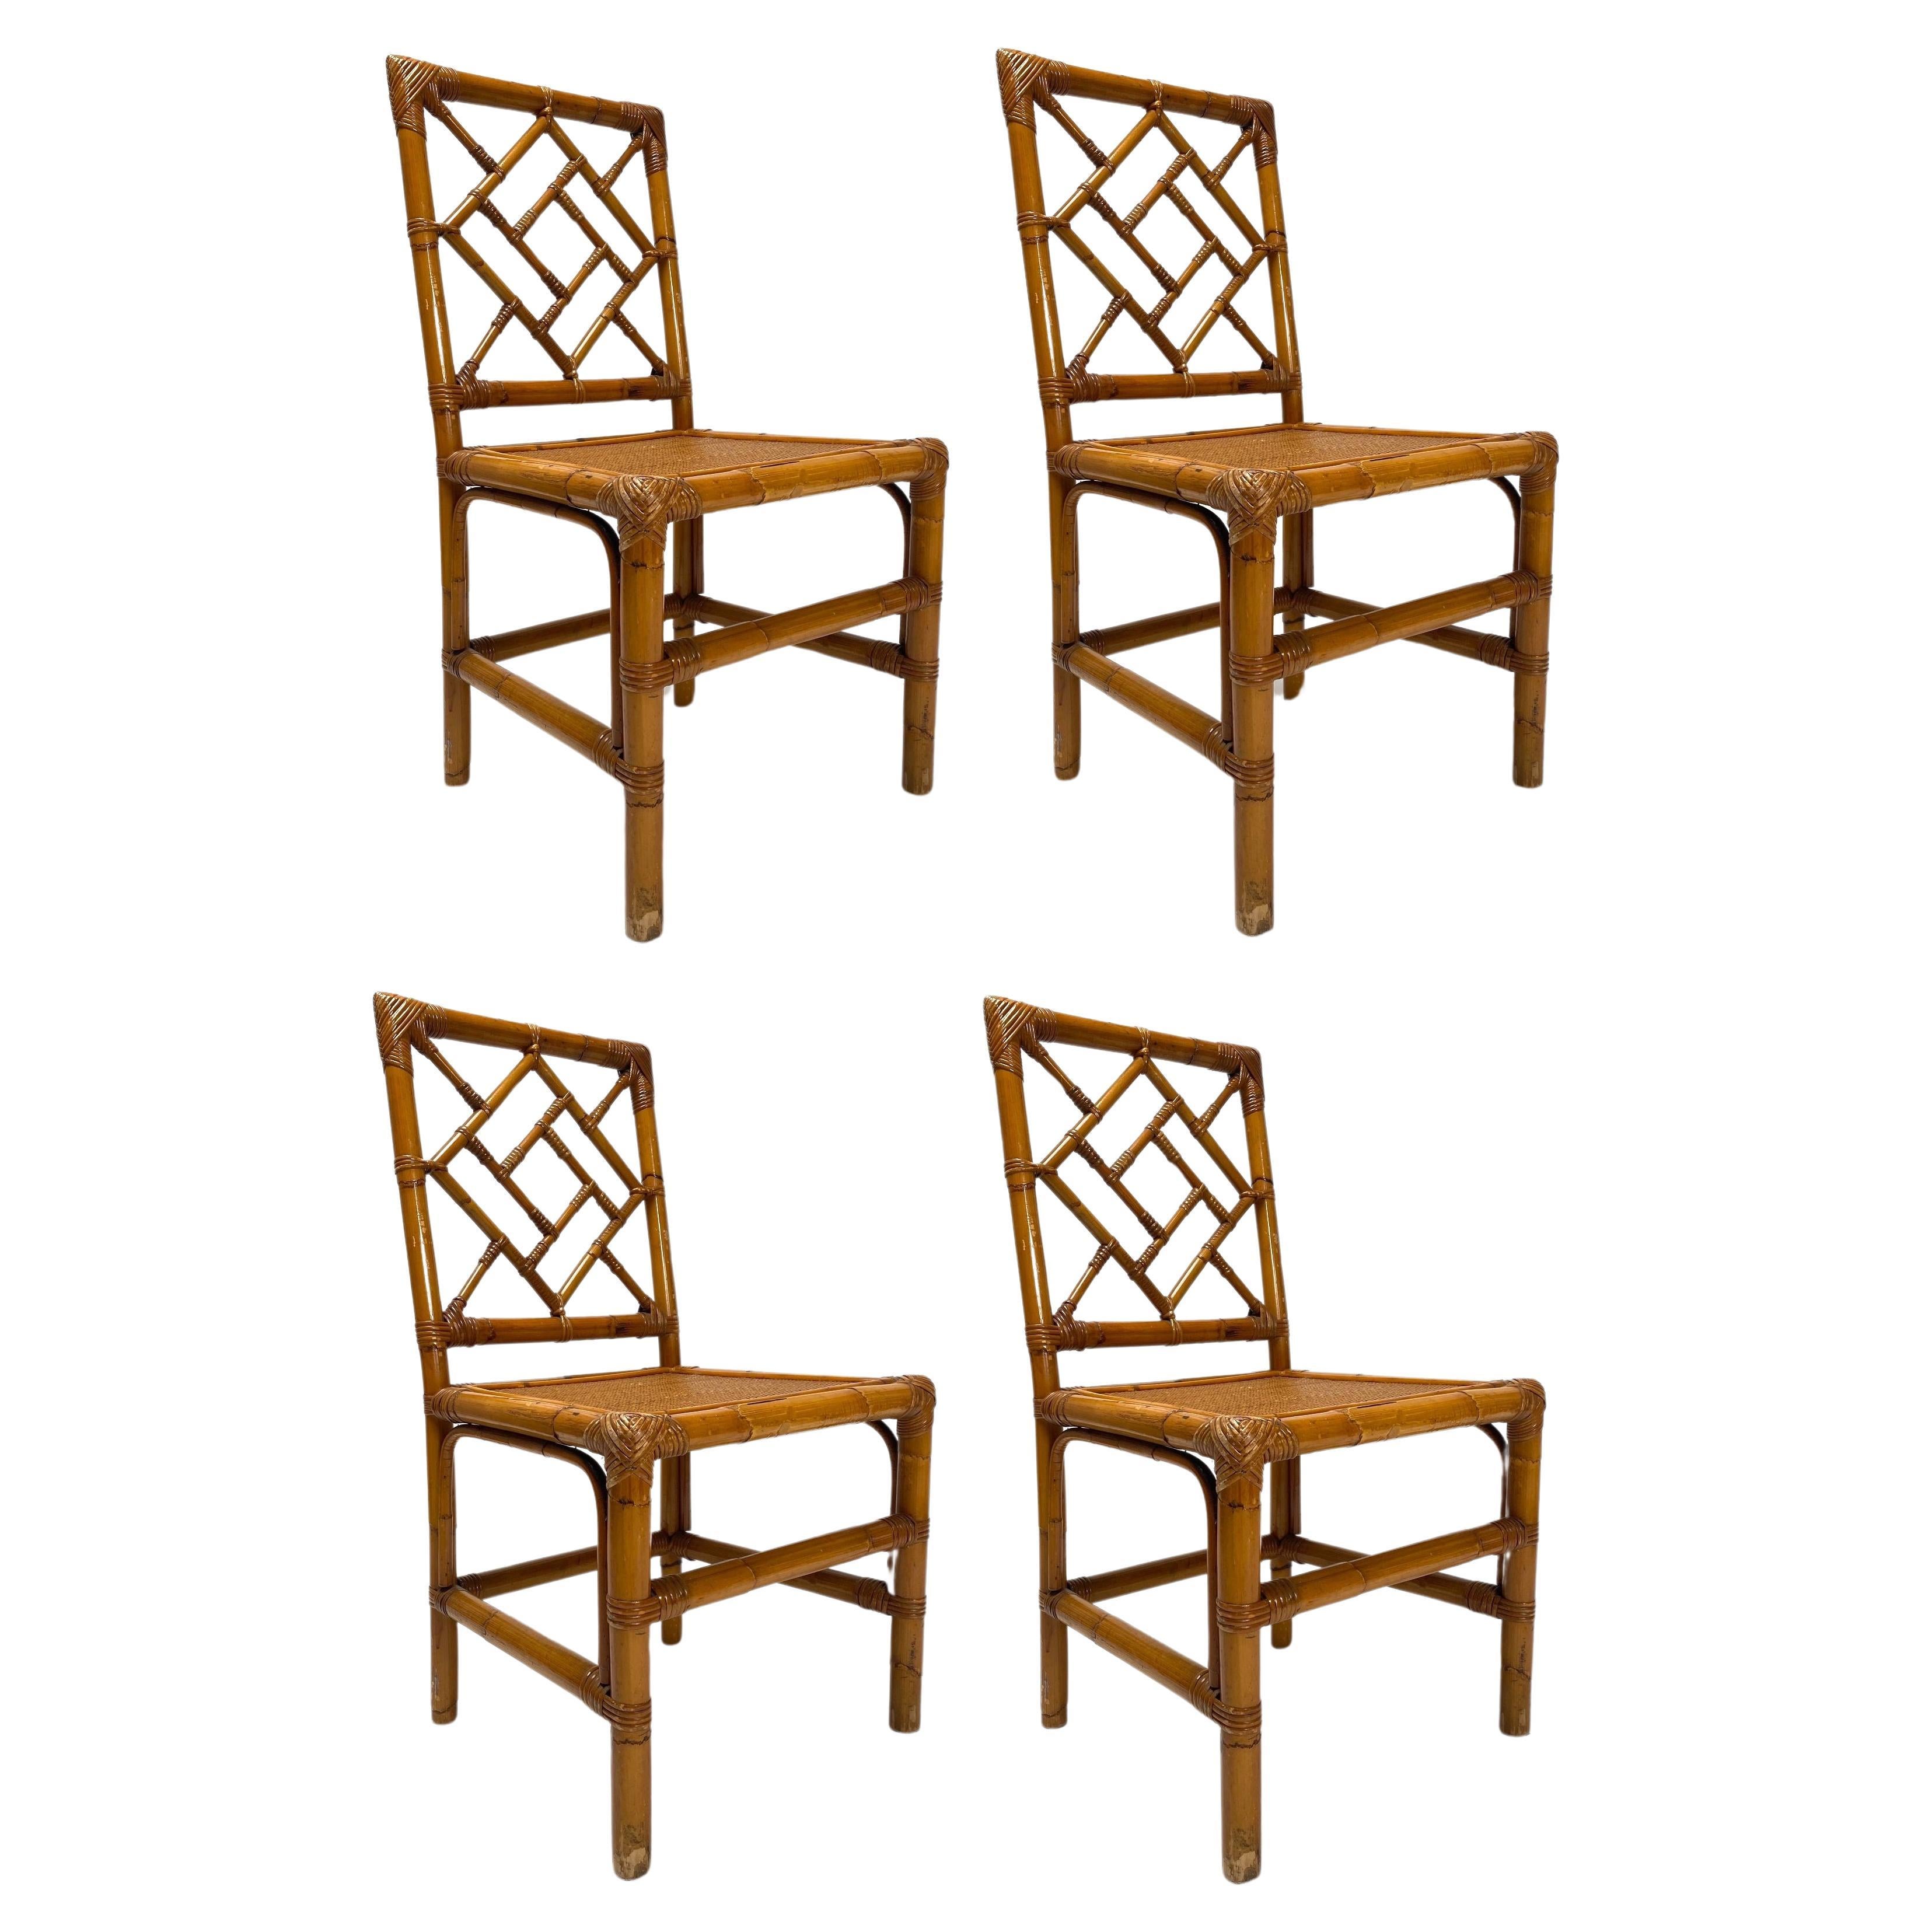 Set of 4 Bamboo chairs by Vivai del Sud, Italy, 1970s